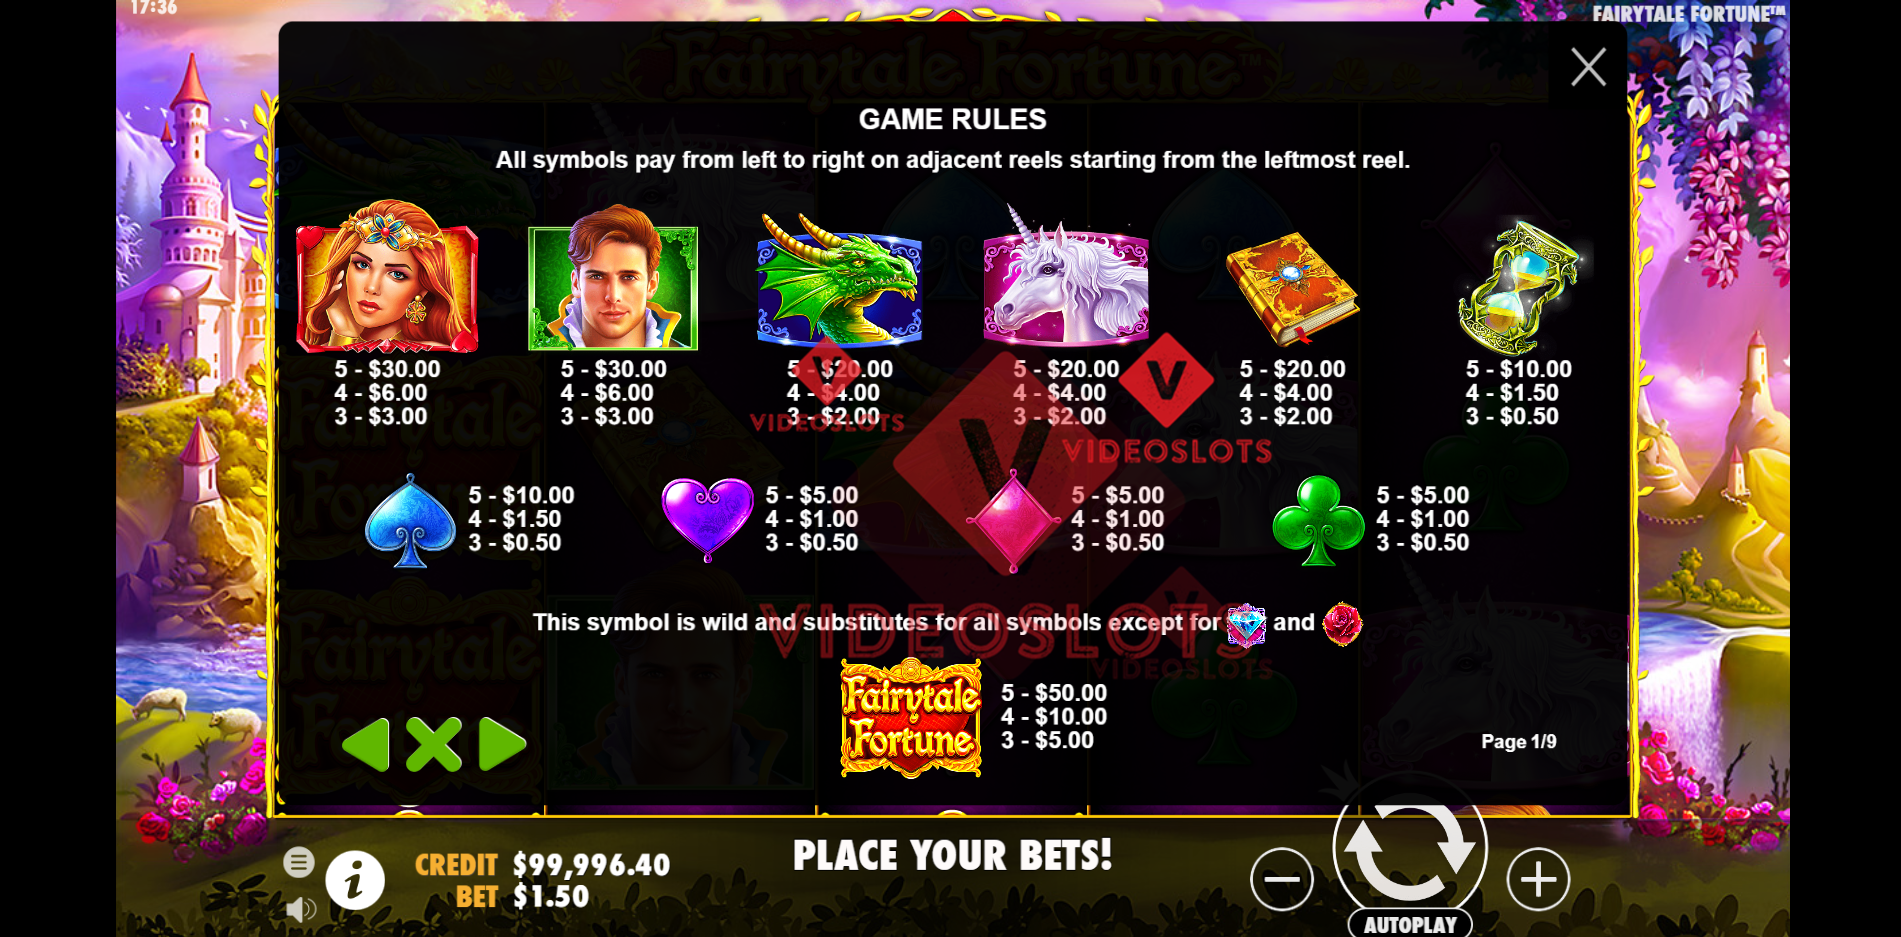 Pay Table for Fairytale Fortune slot by Pragmatic Play